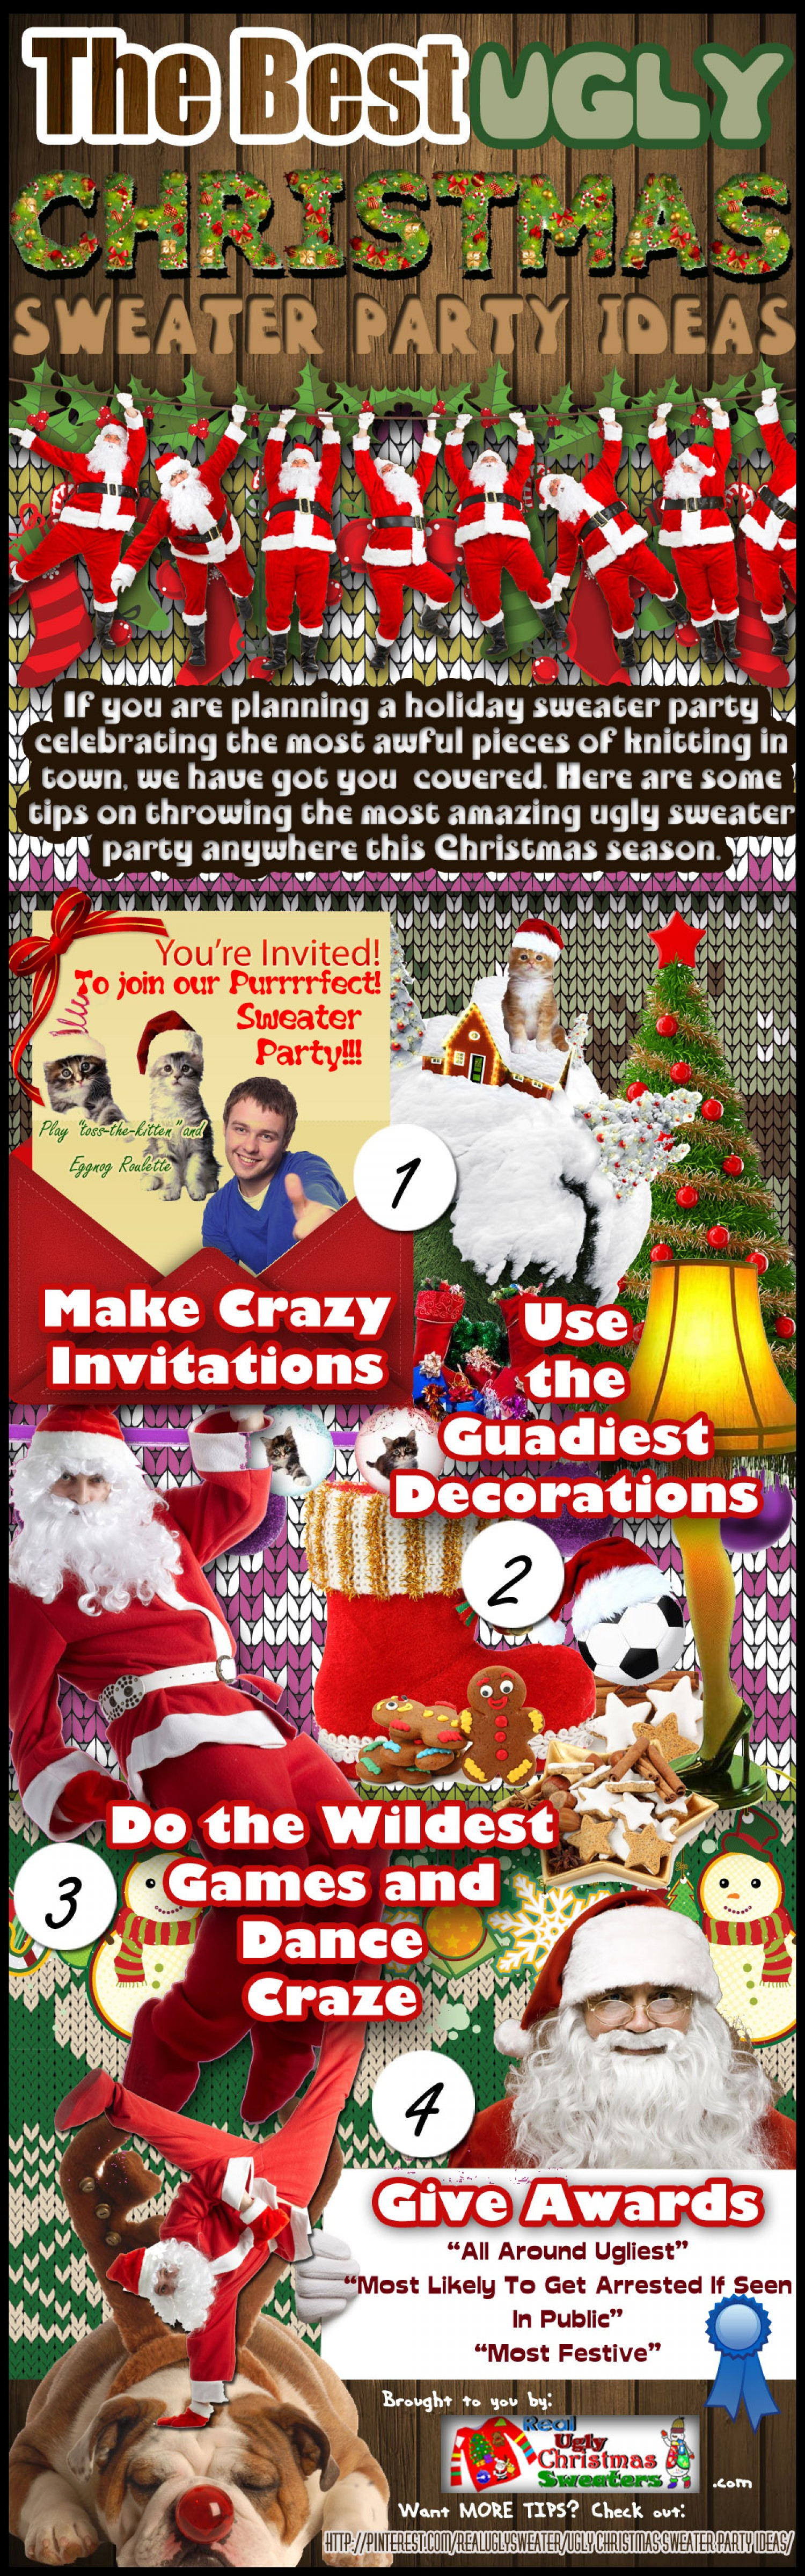 Christmas Sweater Party Ideas
 The Best Ugly Christmas Sweater Party Ideas